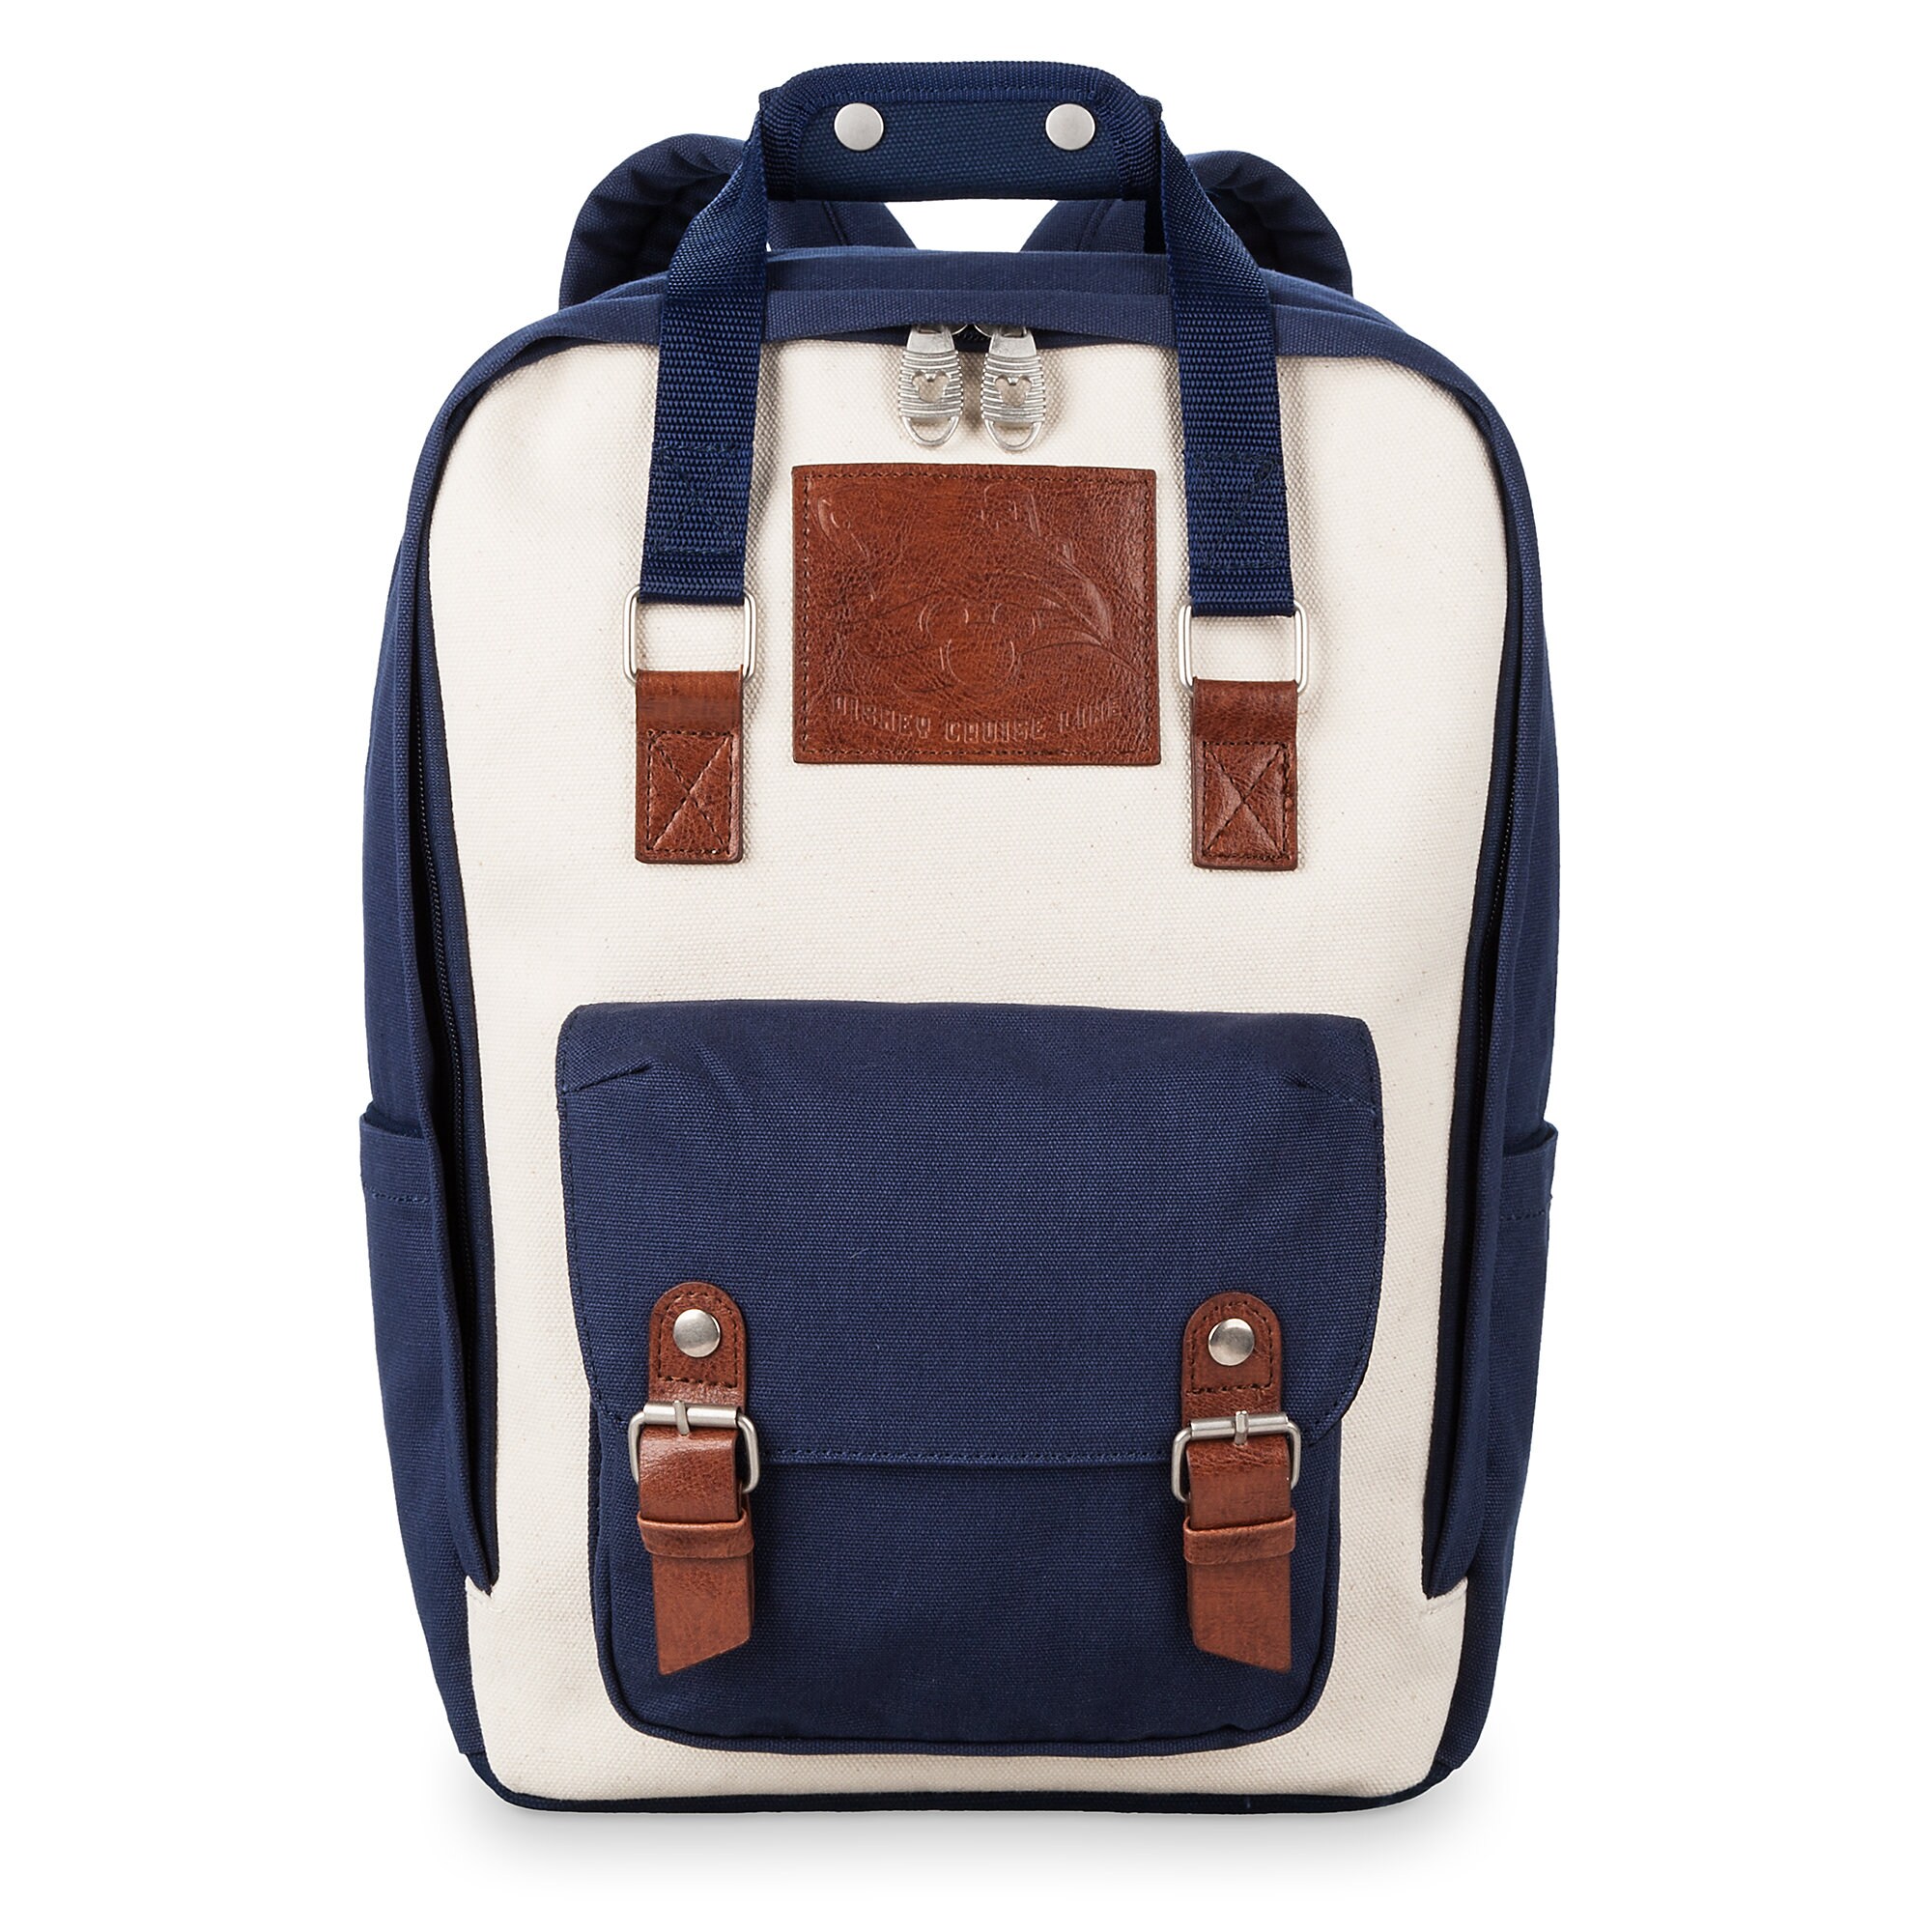 Disney Cruise Line Canvas Backpack